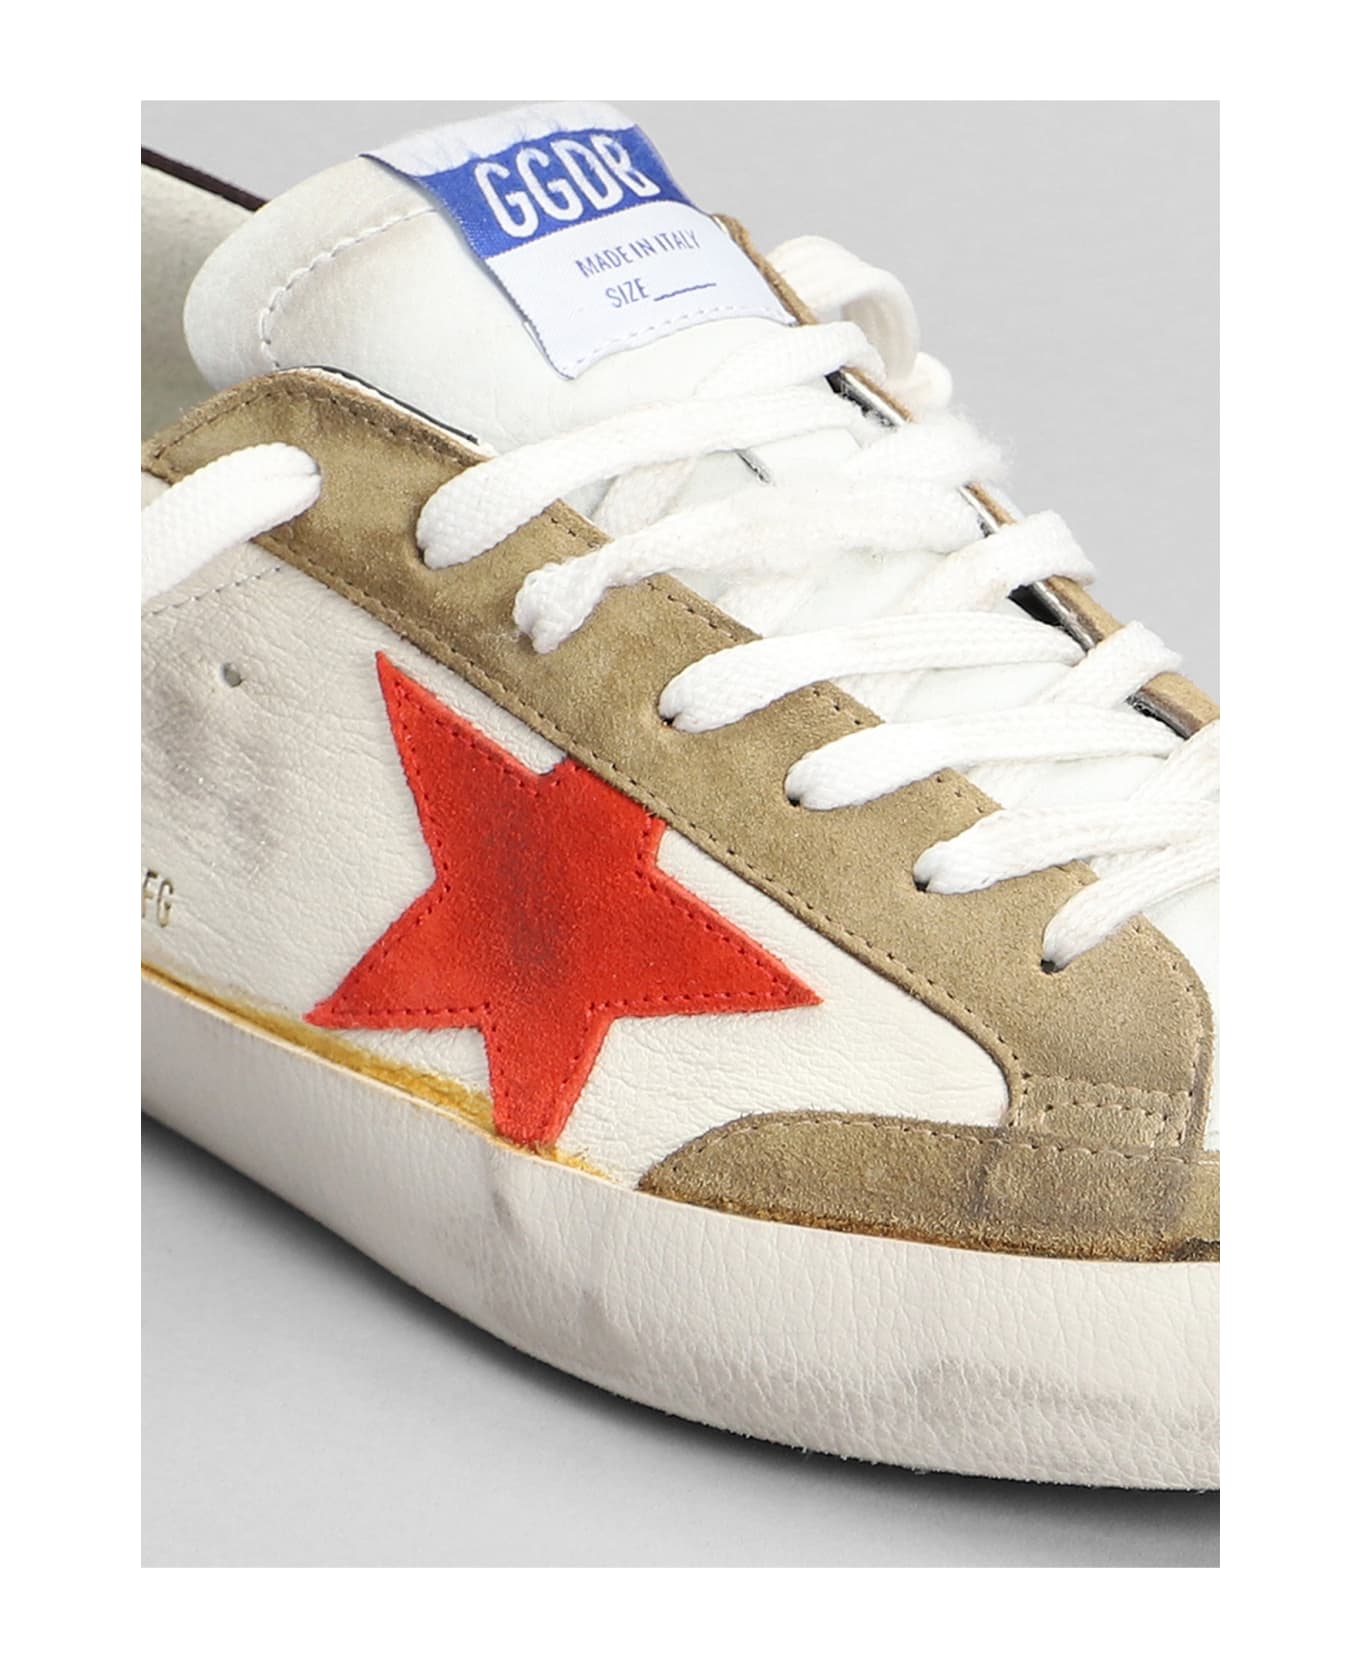 Golden Goose Superstar Sneakers In White Suede And Leather - 10531